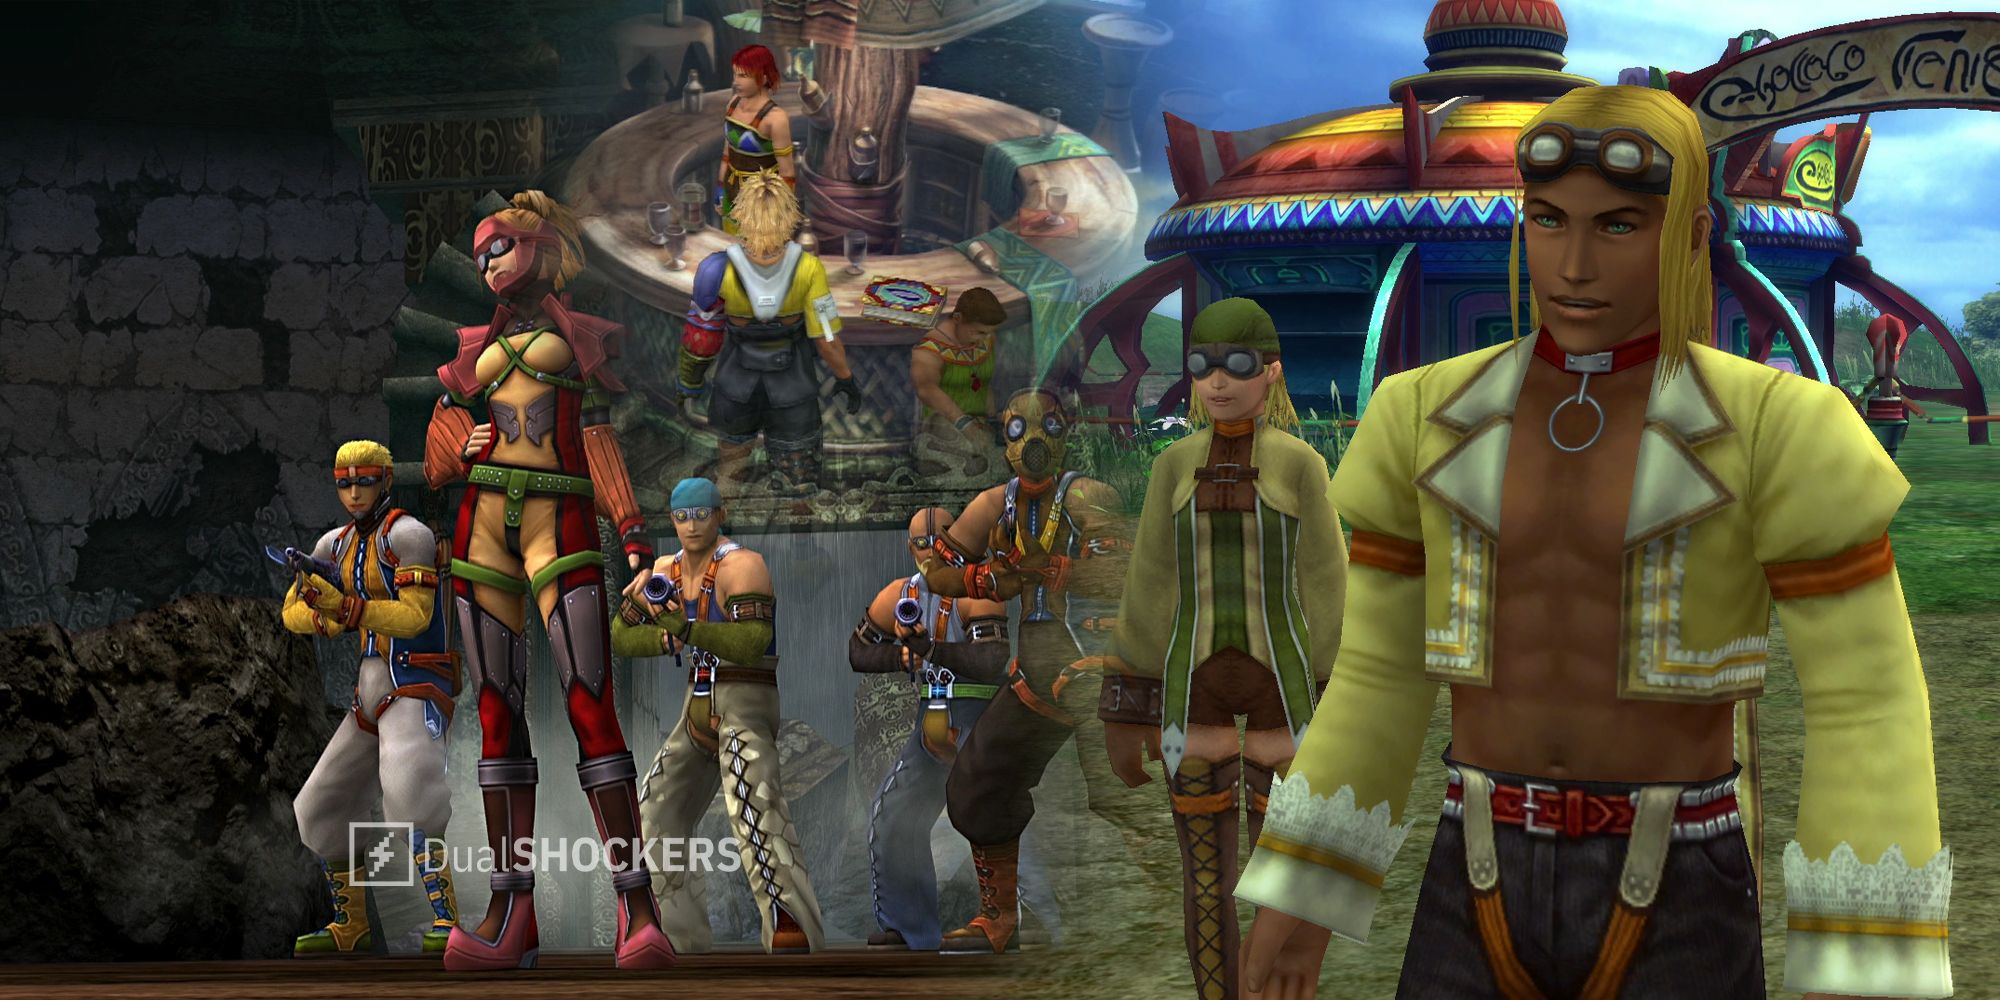 Final Fantasy X Al Bhed characters and gameplay